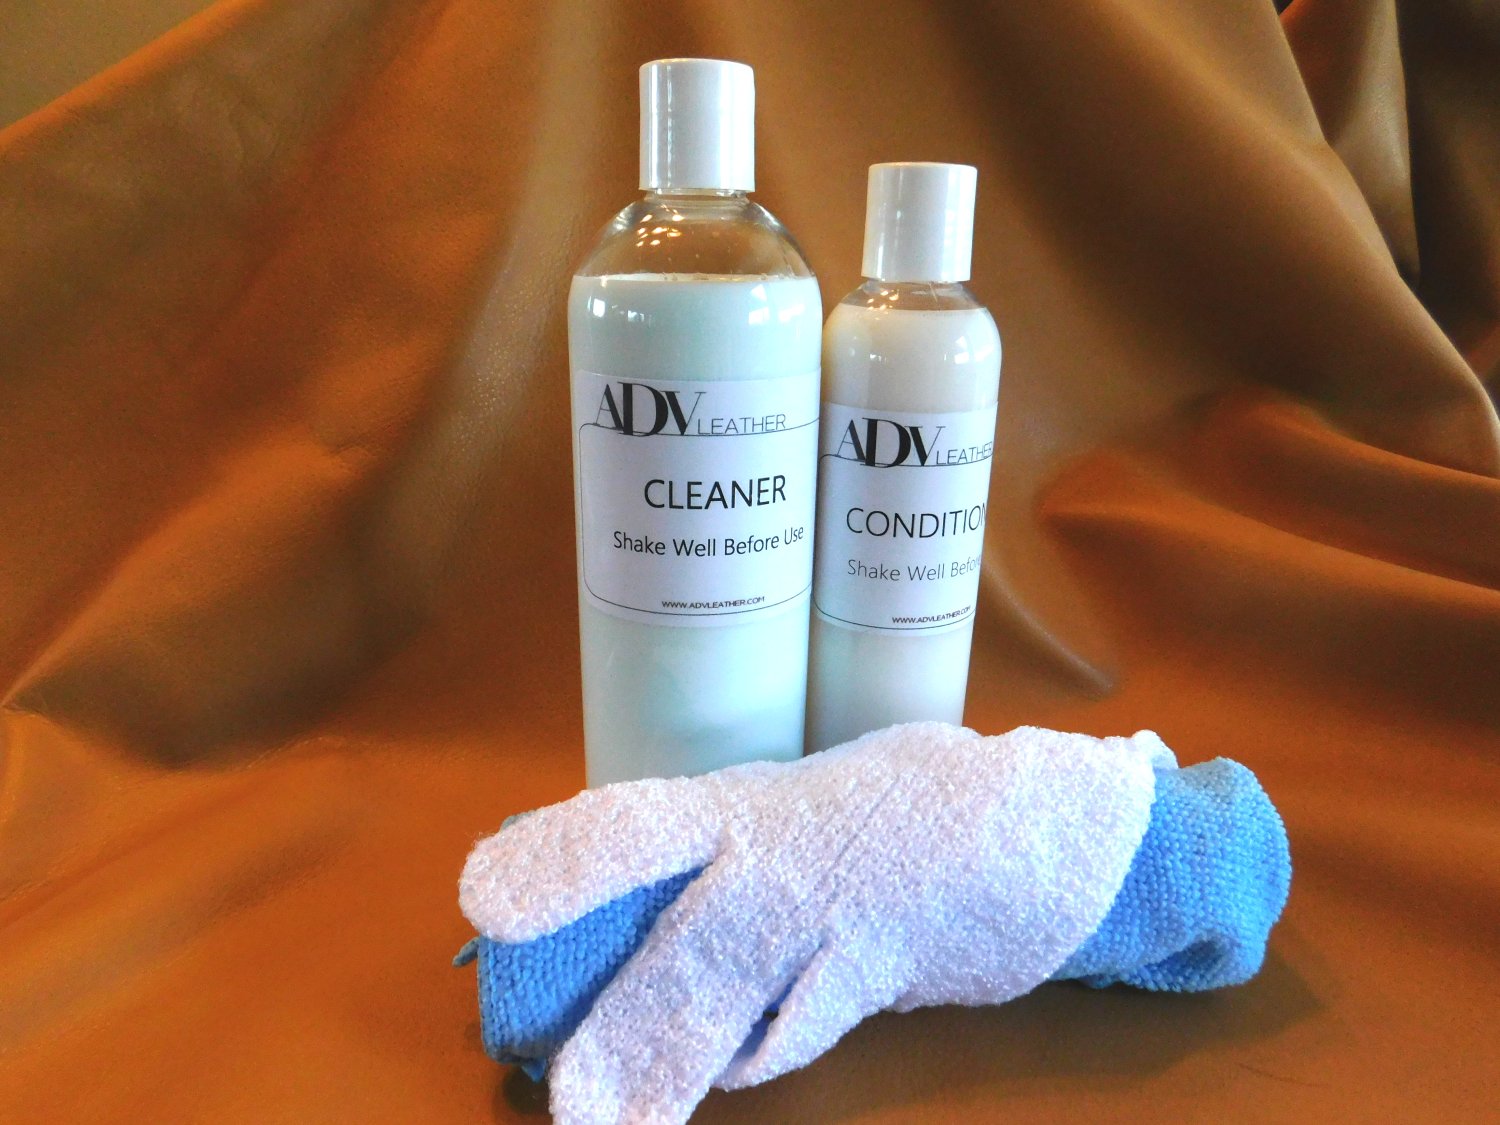 ADV leather cleaner and conditioner bundle